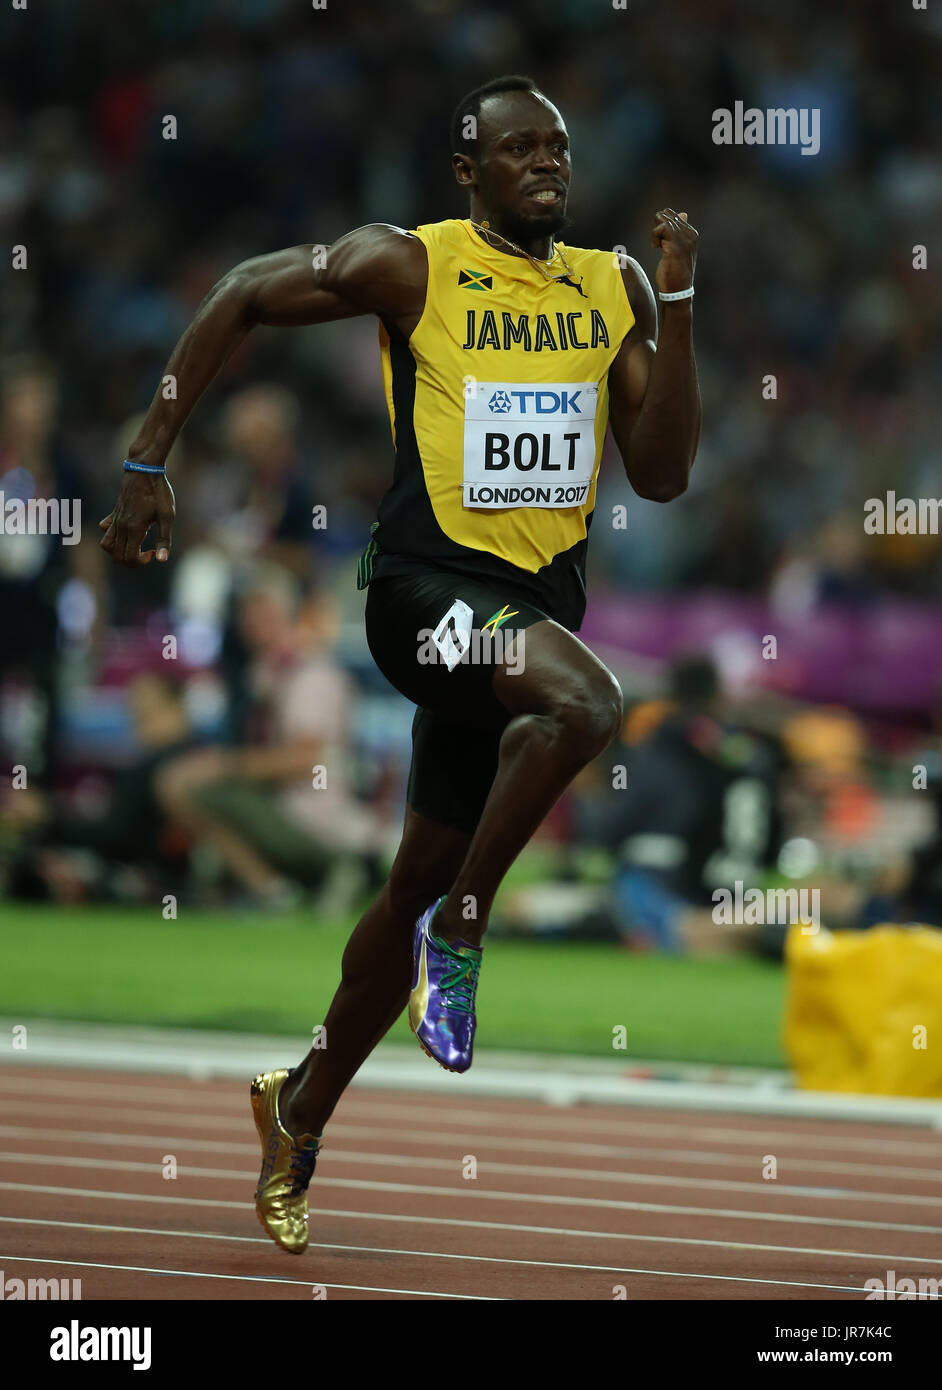 Usain Bolt 100 Metres Iaaf World Athletics London 2017 London Stam, Queen Elizabeth Olympic Park, London, Englan 05 August 2016 Iaaf World Athletics London 2017 Credit: Allstar Picture Library/Alamy Live News Stock Photo